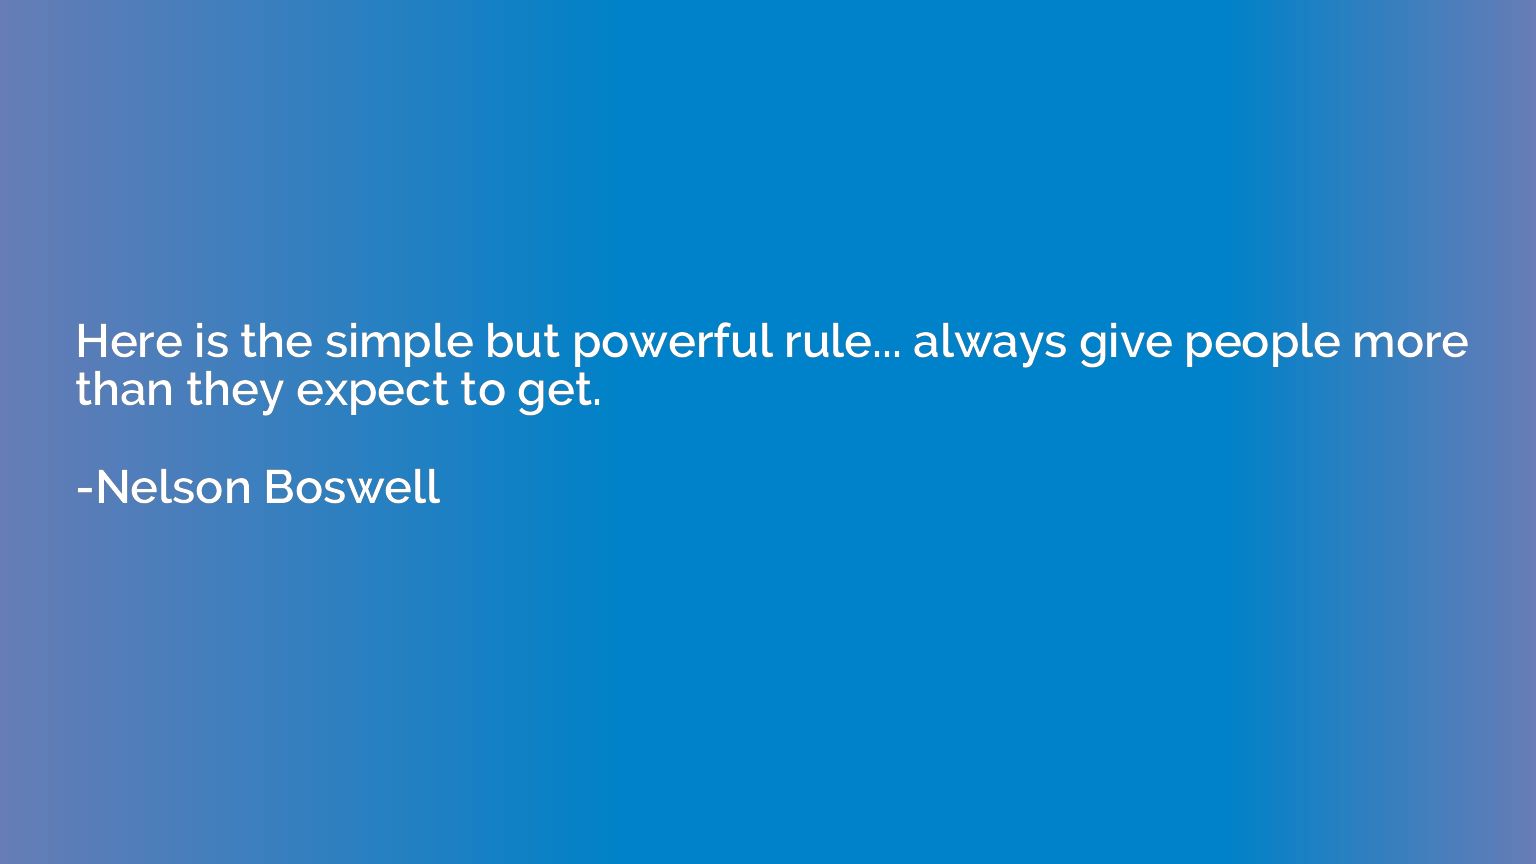 Here is the simple but powerful rule... always give people m